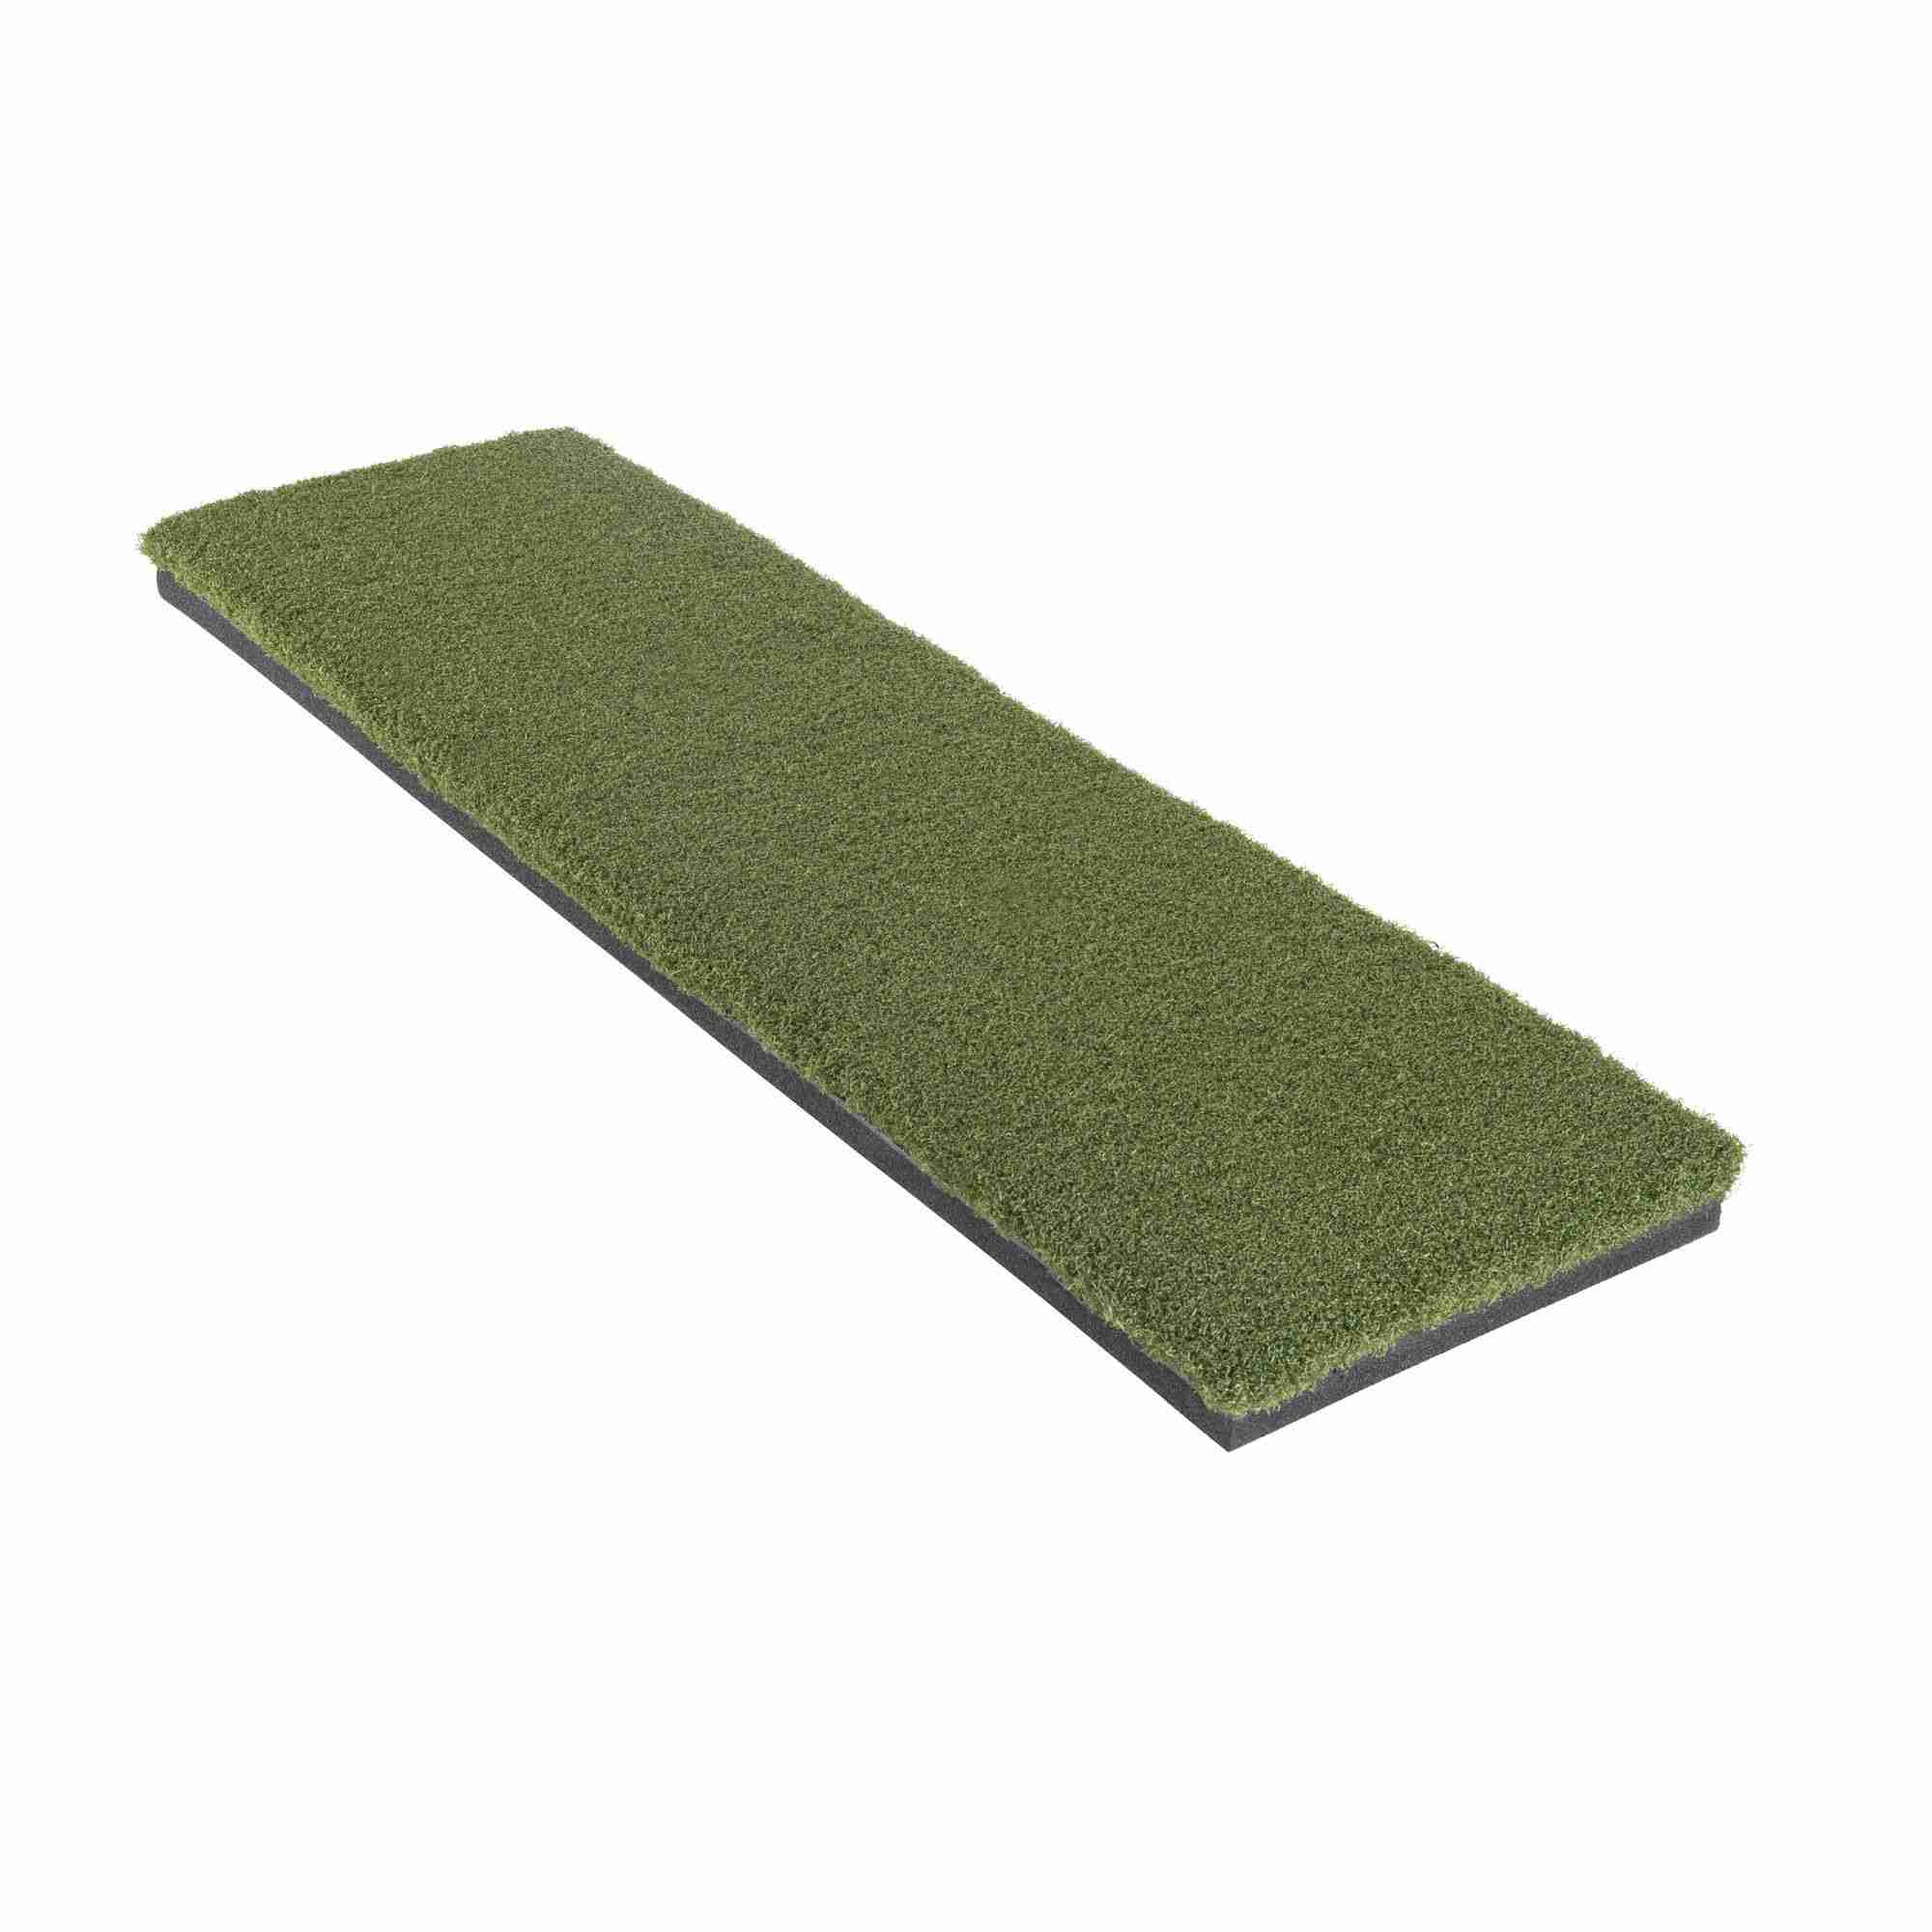 golf-mats-practice with cash back rebate